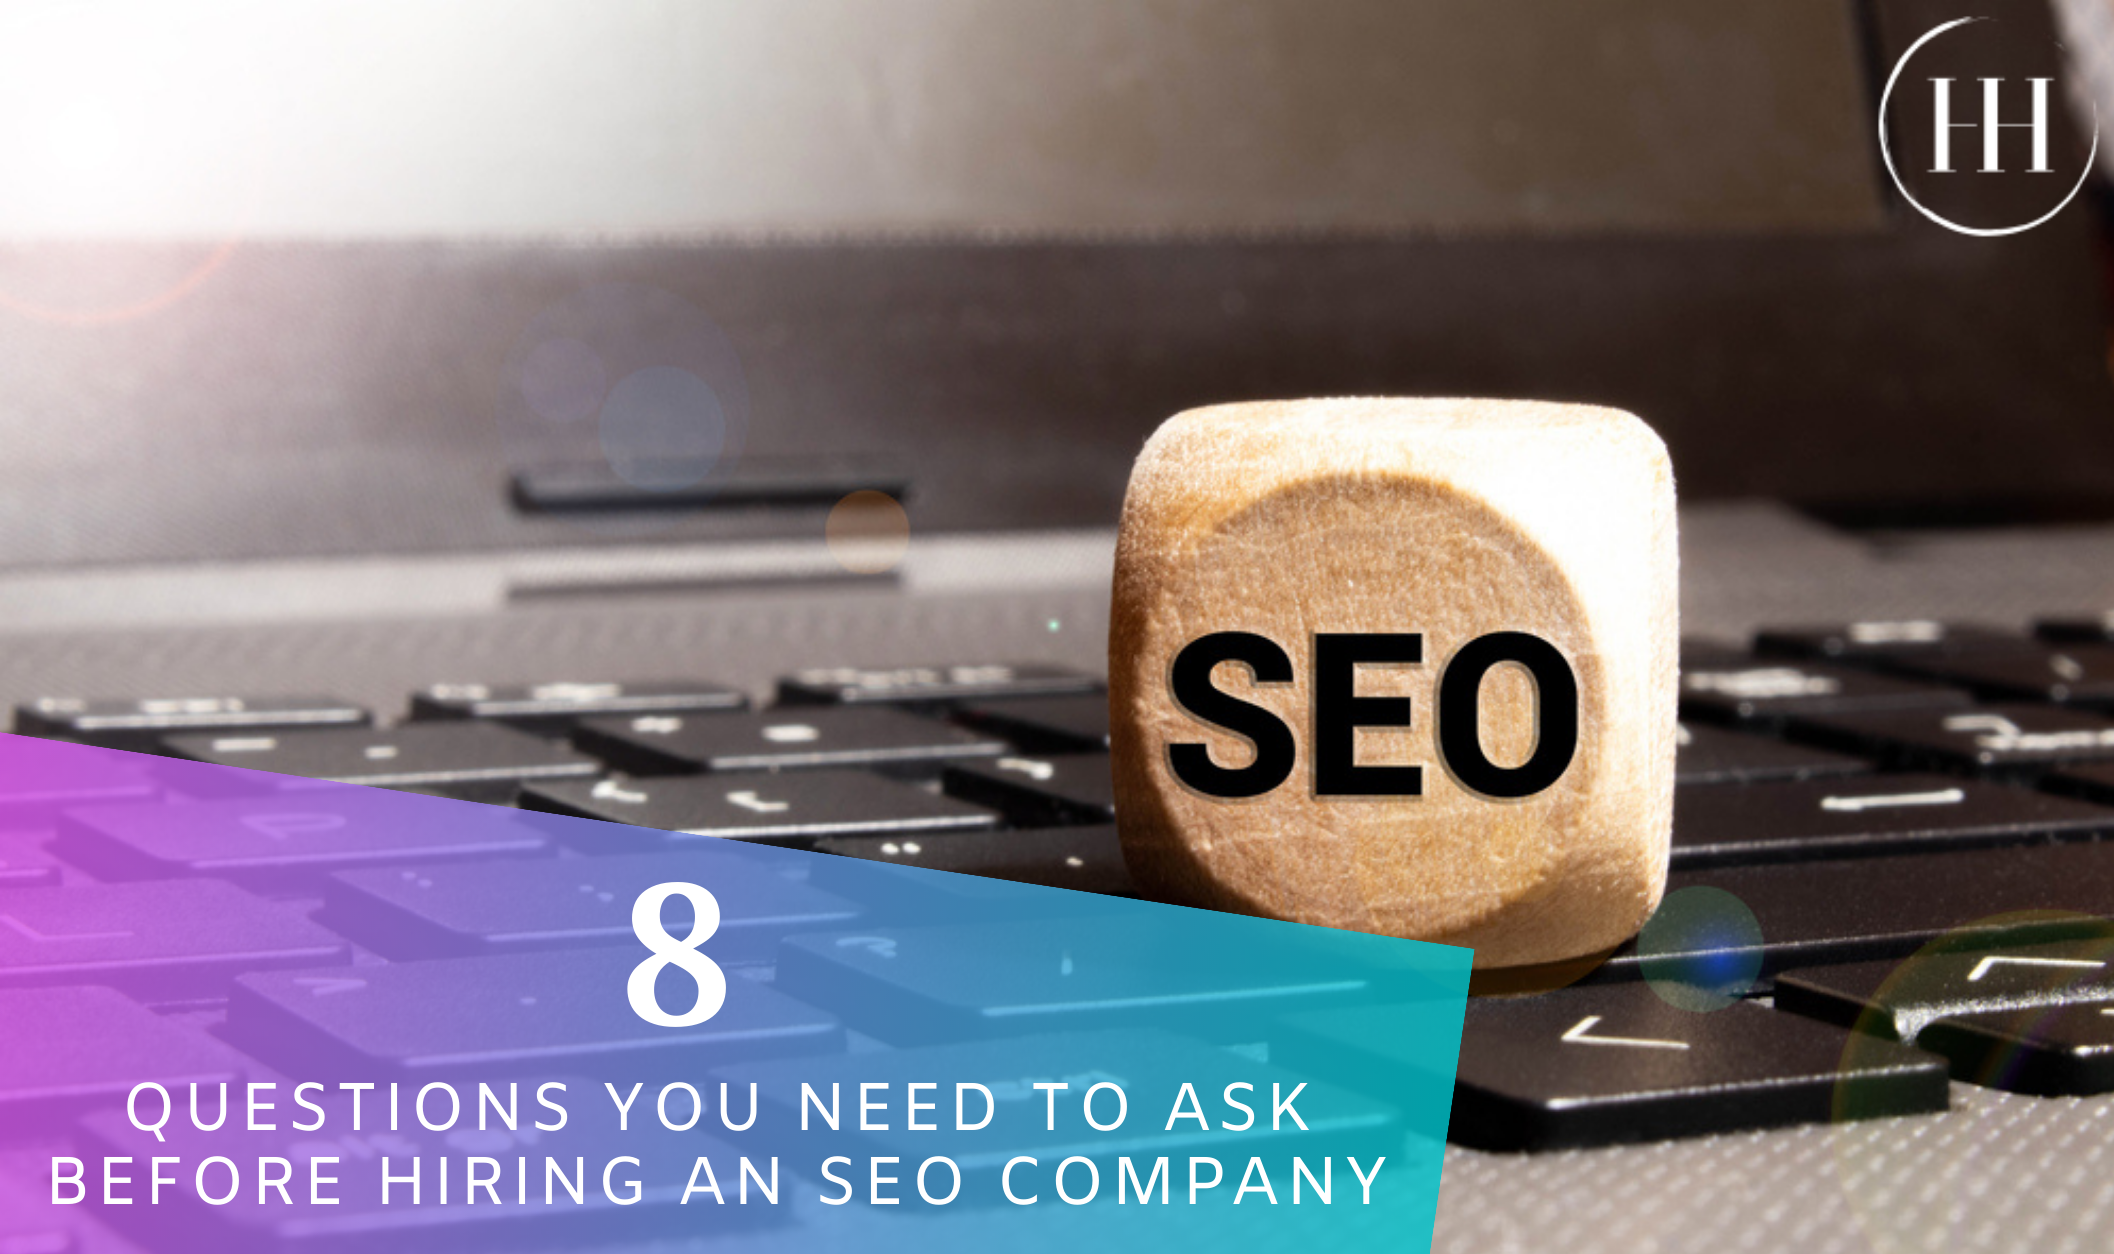 8 Questions You Need to Ask Before Hiring an SEO Company